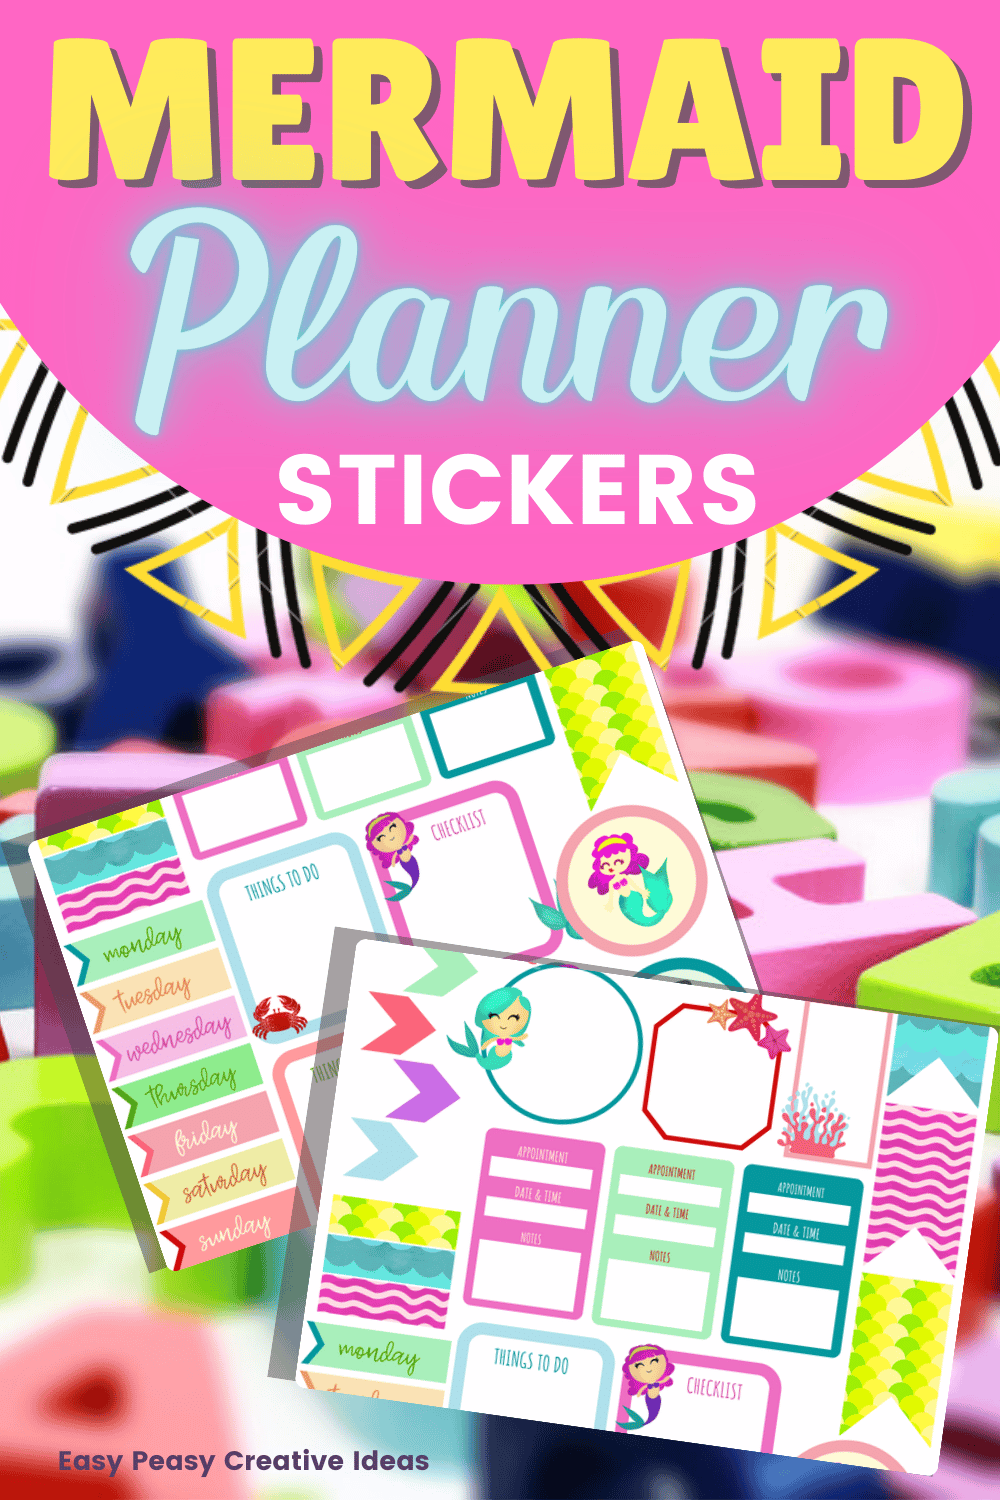 Photo collage of mermaid stickers for planners